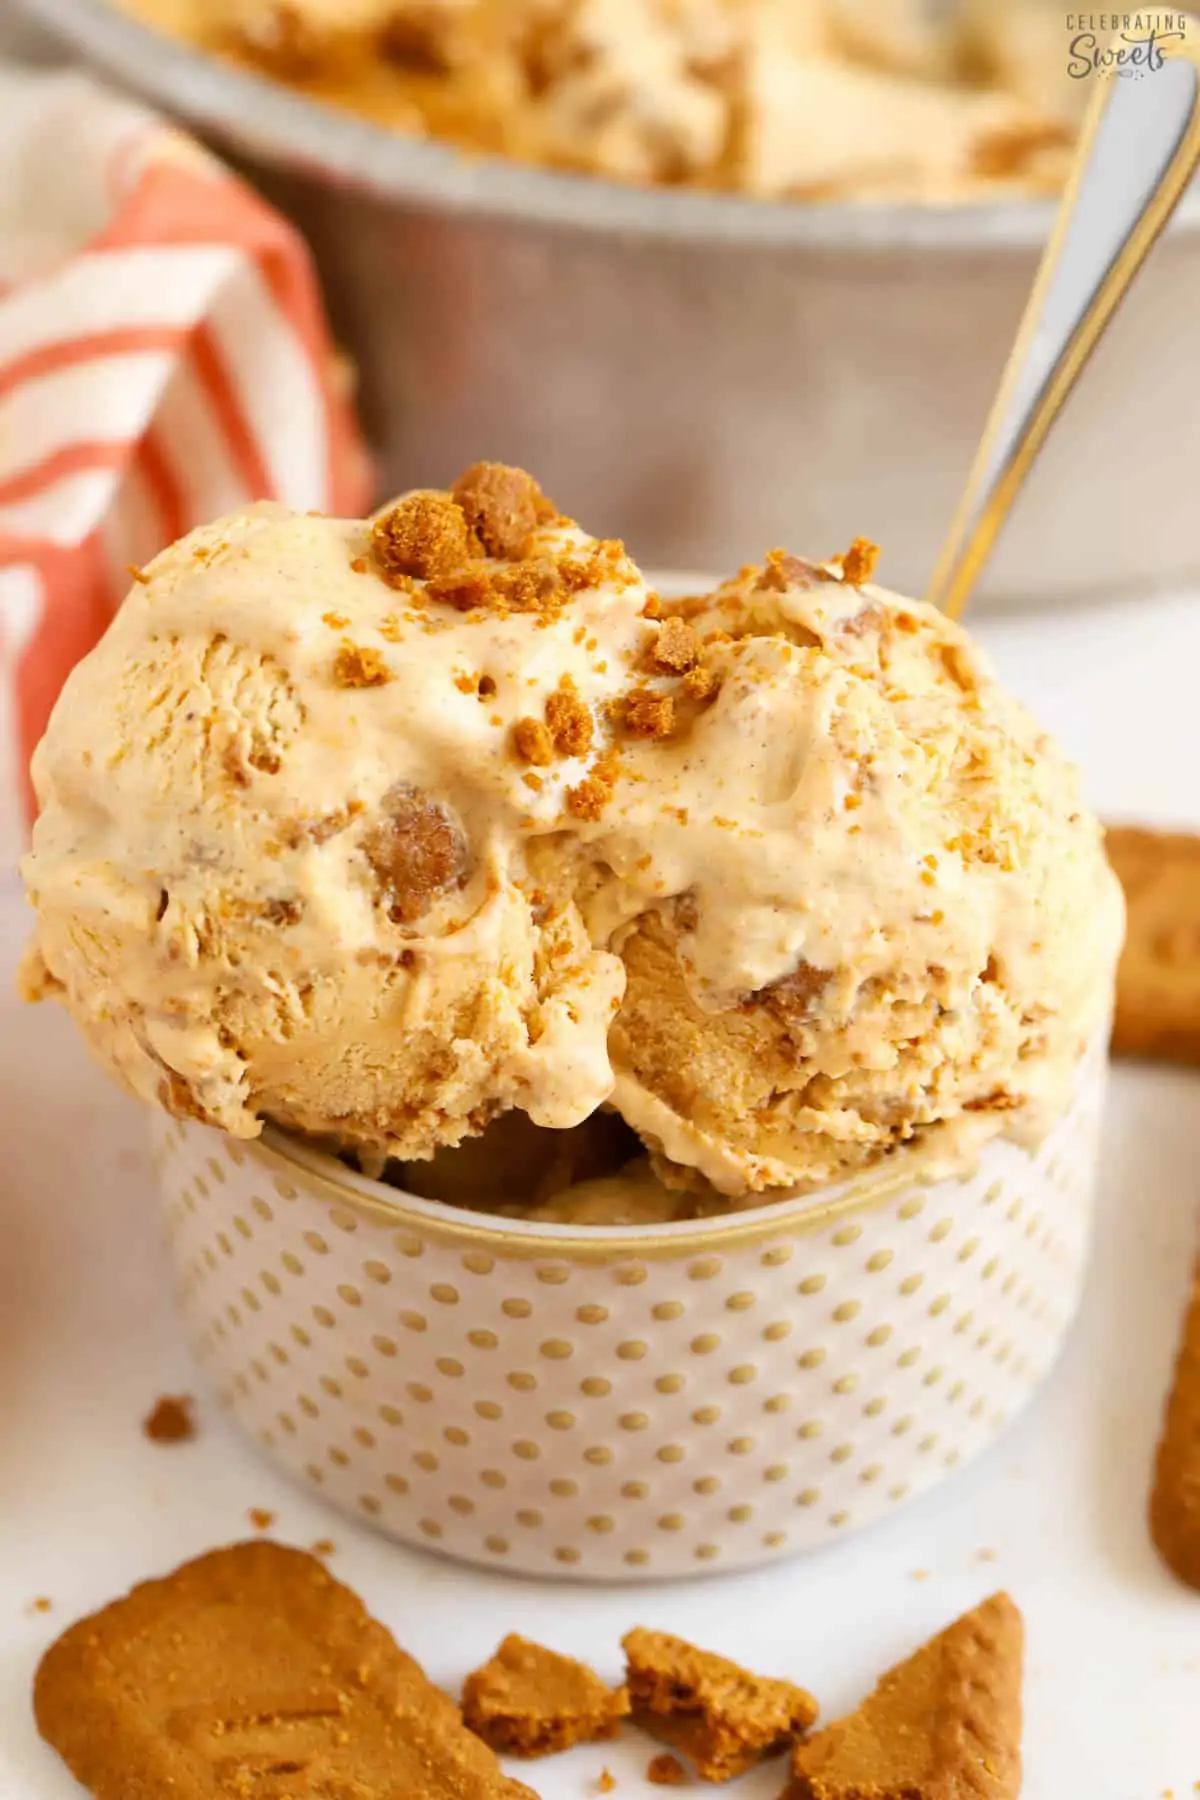 Pumpkin ice cream in a polka dotted bowl with a silver and gold spoon.